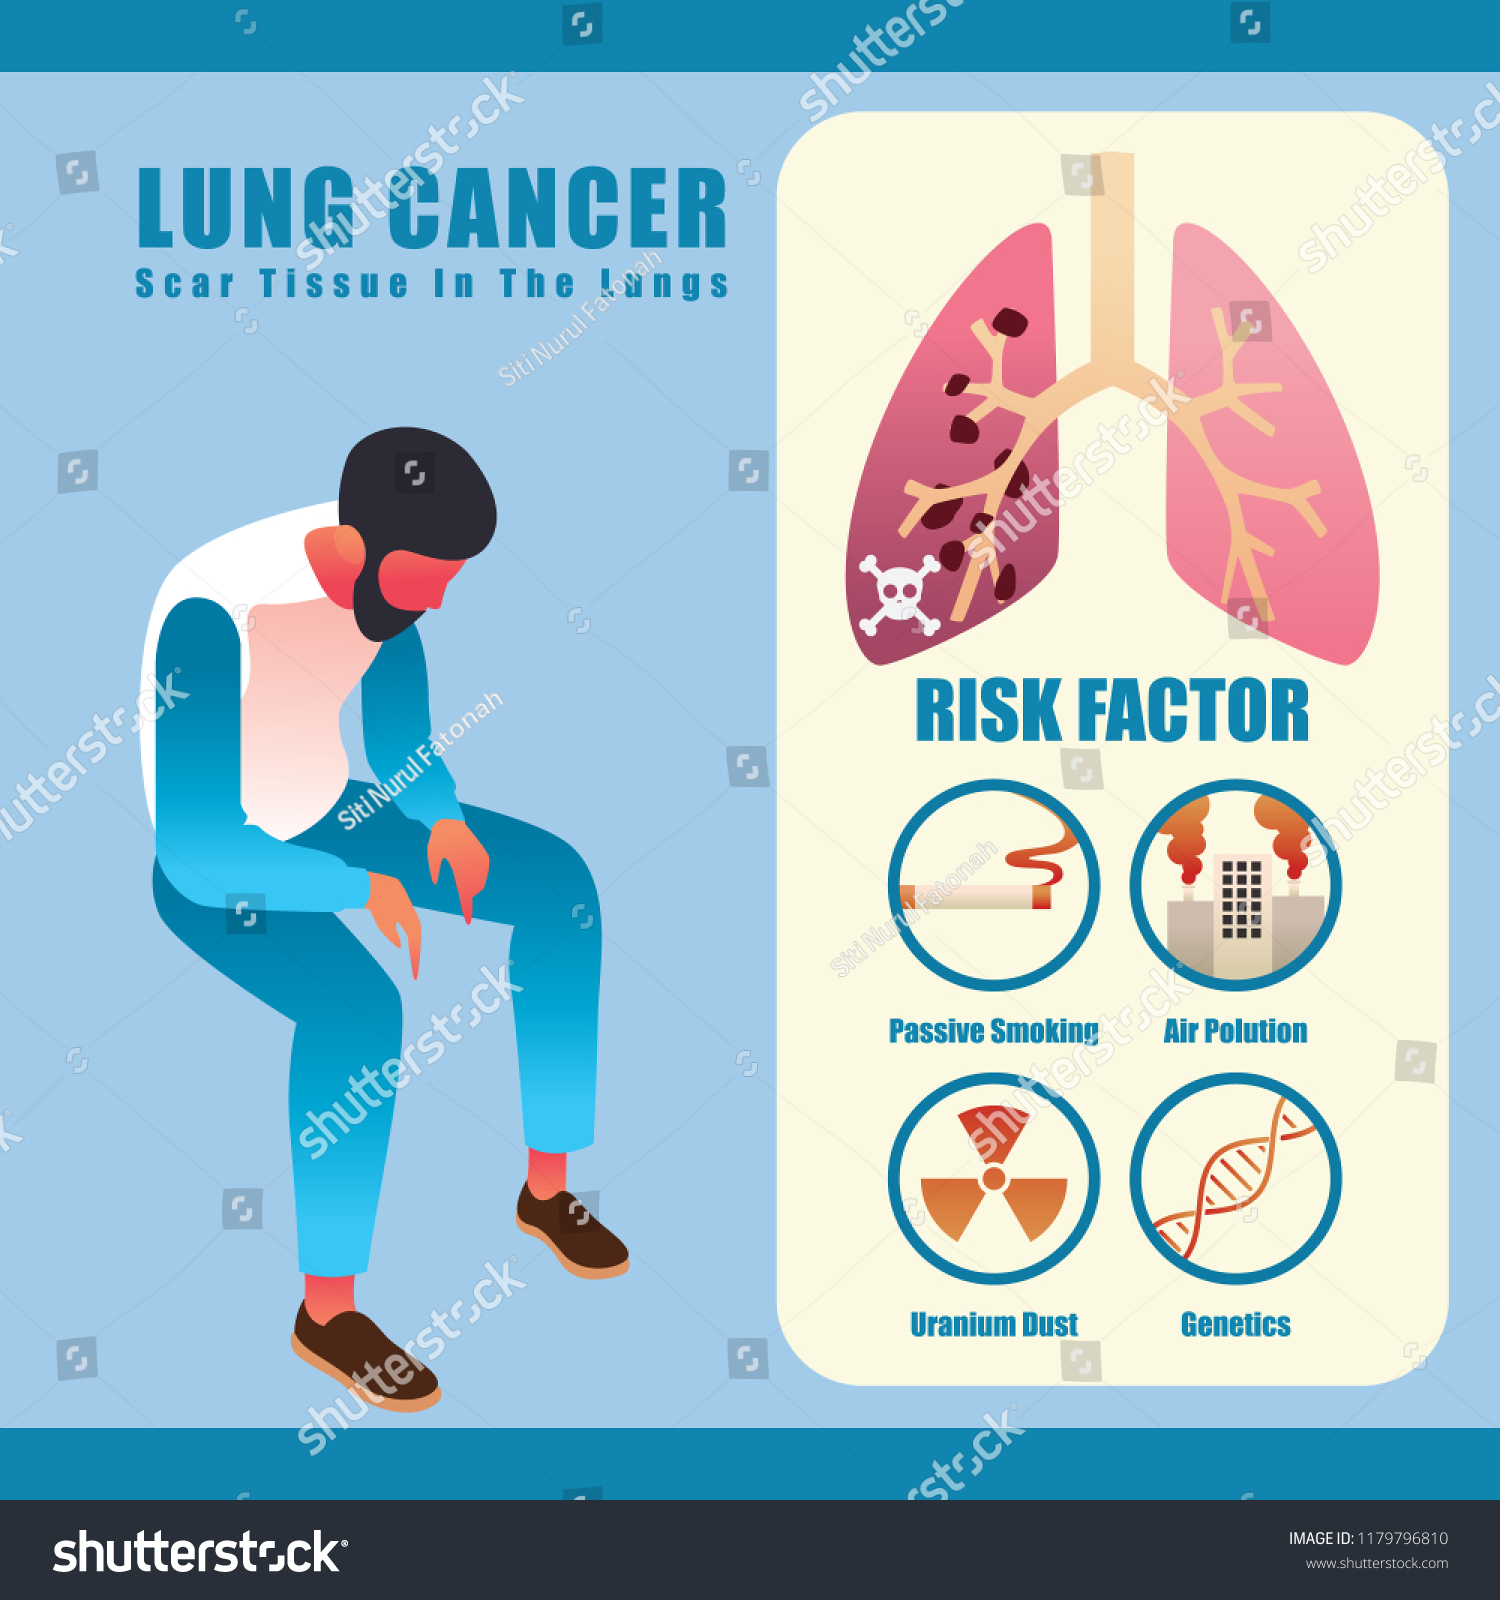 Non Small Cell Lung Cancer Causes And Risk Factors